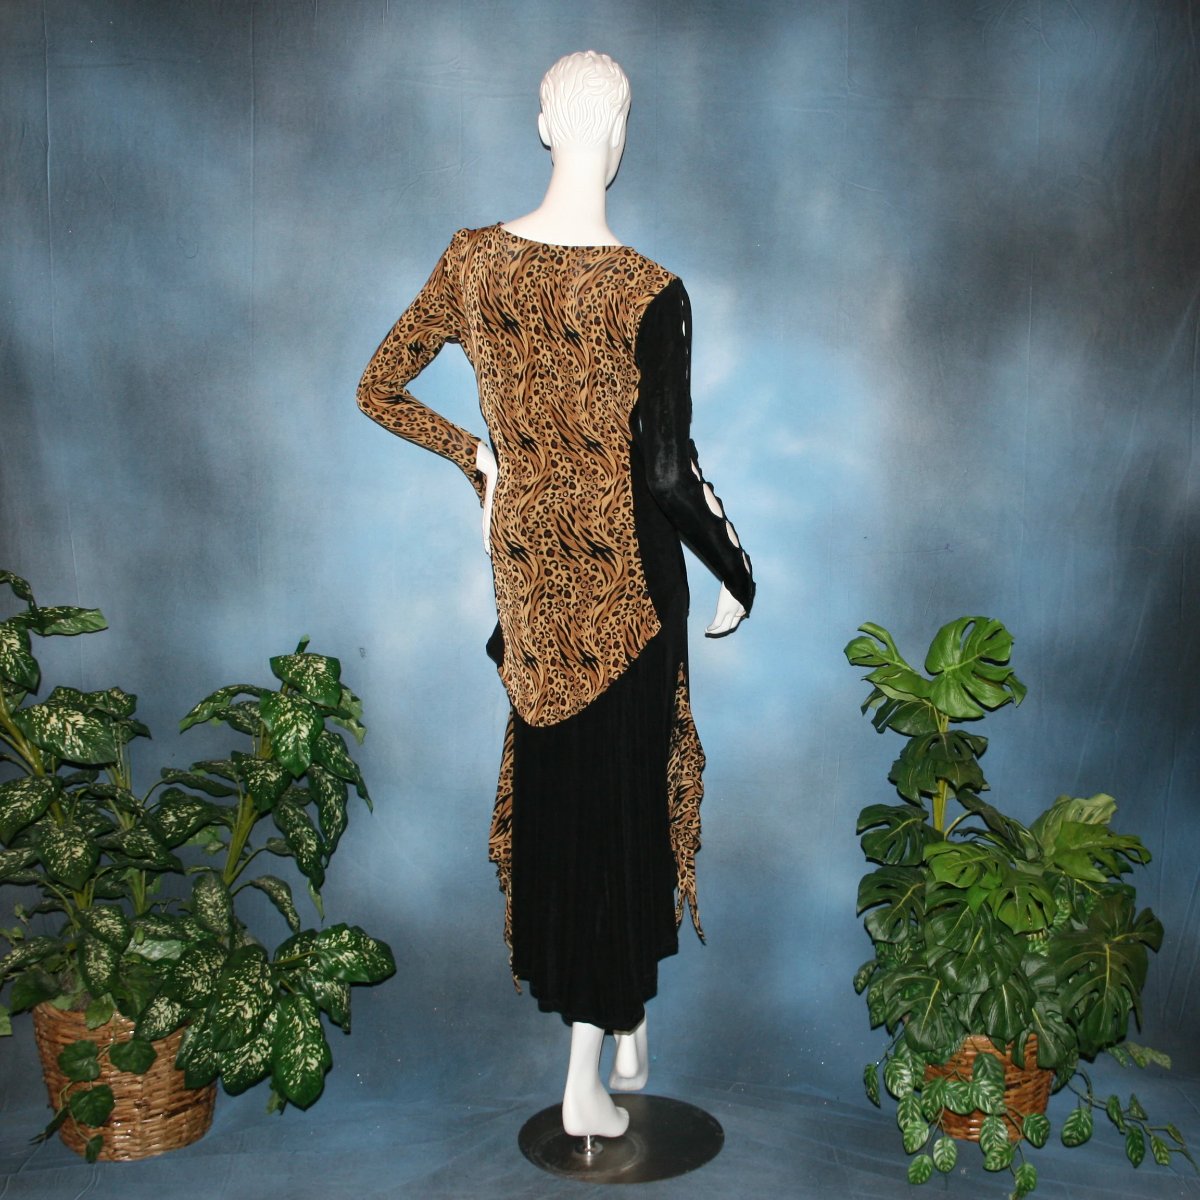 back view of Ballroom social slinky dance set consisting of a black slinky Latin/rhythm skirt with serengeti print slinky & matching tunic top with color blocking & open detailing work in the long sleeves. The tunic top can be worn separately as a Latin/rhythm dress with dance trunks or a shorter little skirt can be custom made to go with it for an extra fee. You can also team the slinky tunic with pants. This slinky Latin/rhythm skirt & top is great for ballroom teachers!